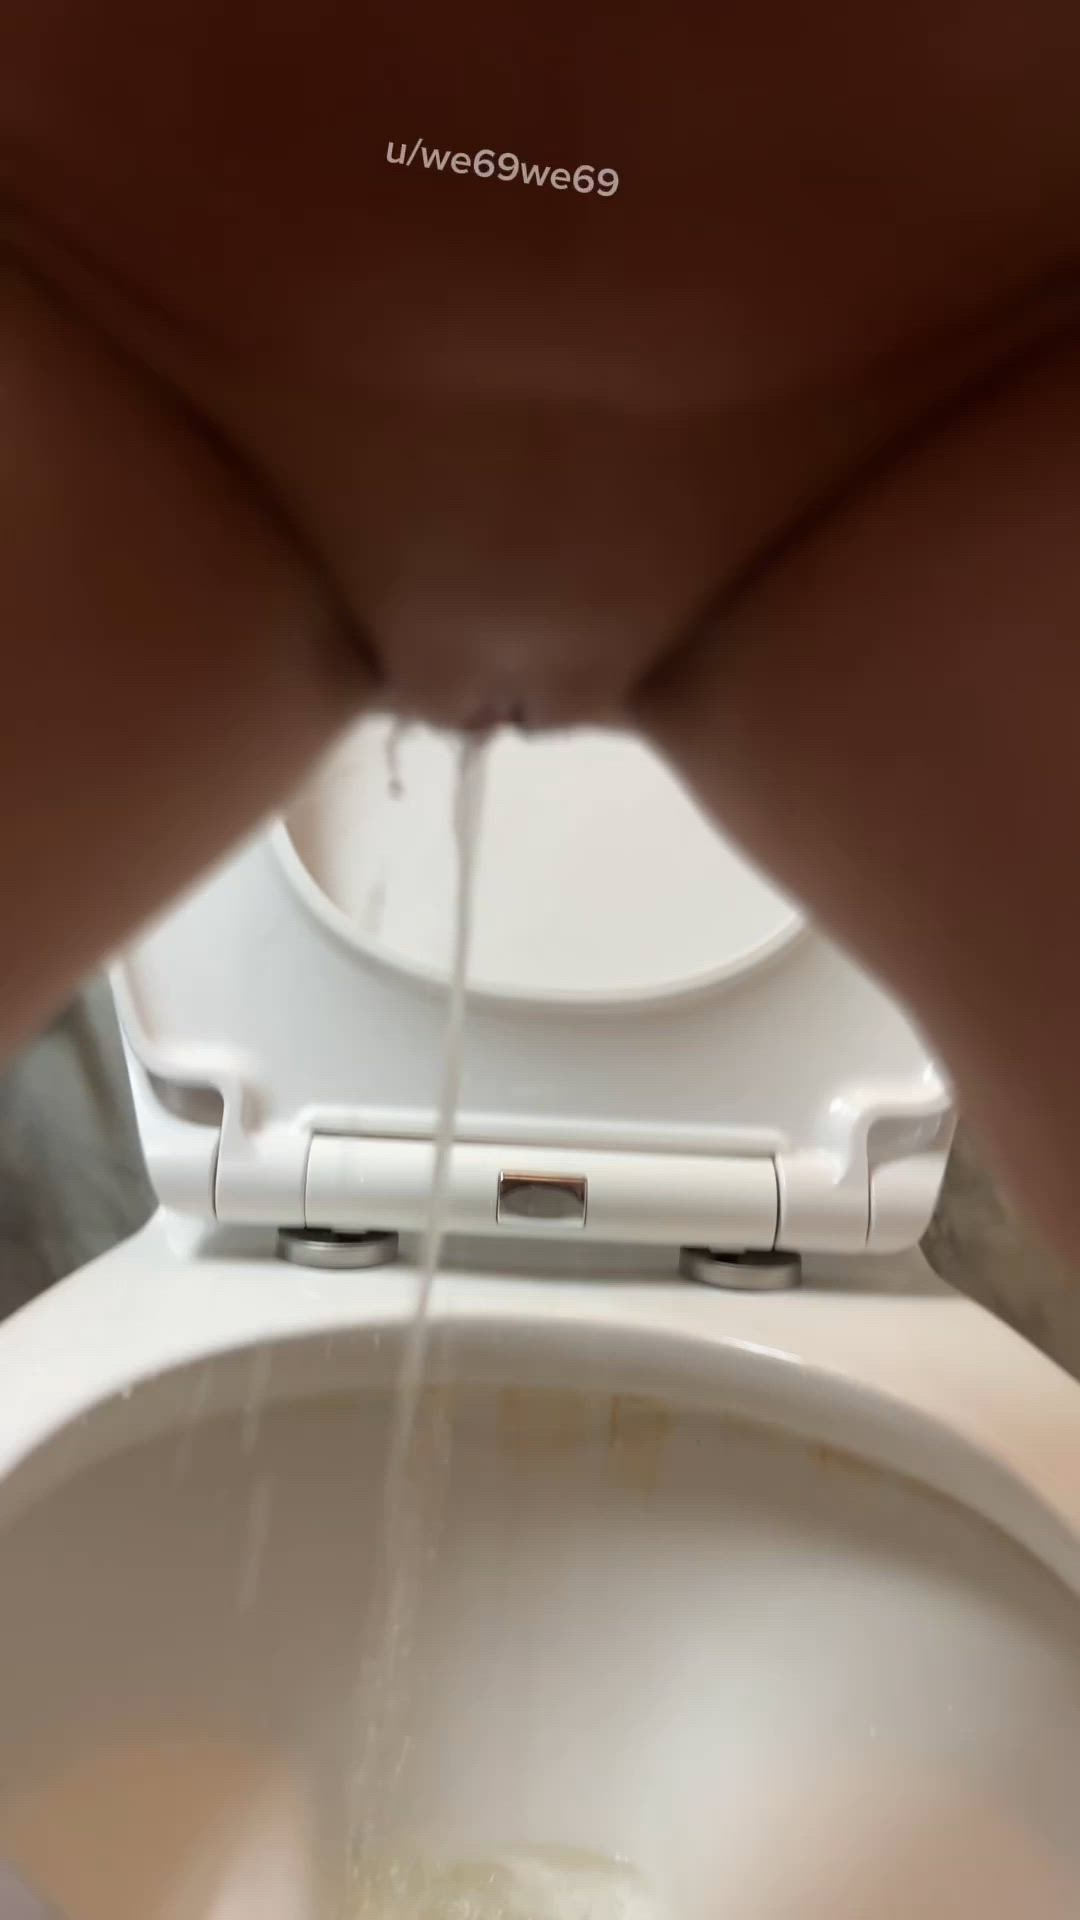 Amateur porn video with onlyfans model we69we69 <strong>@we69we69</strong>